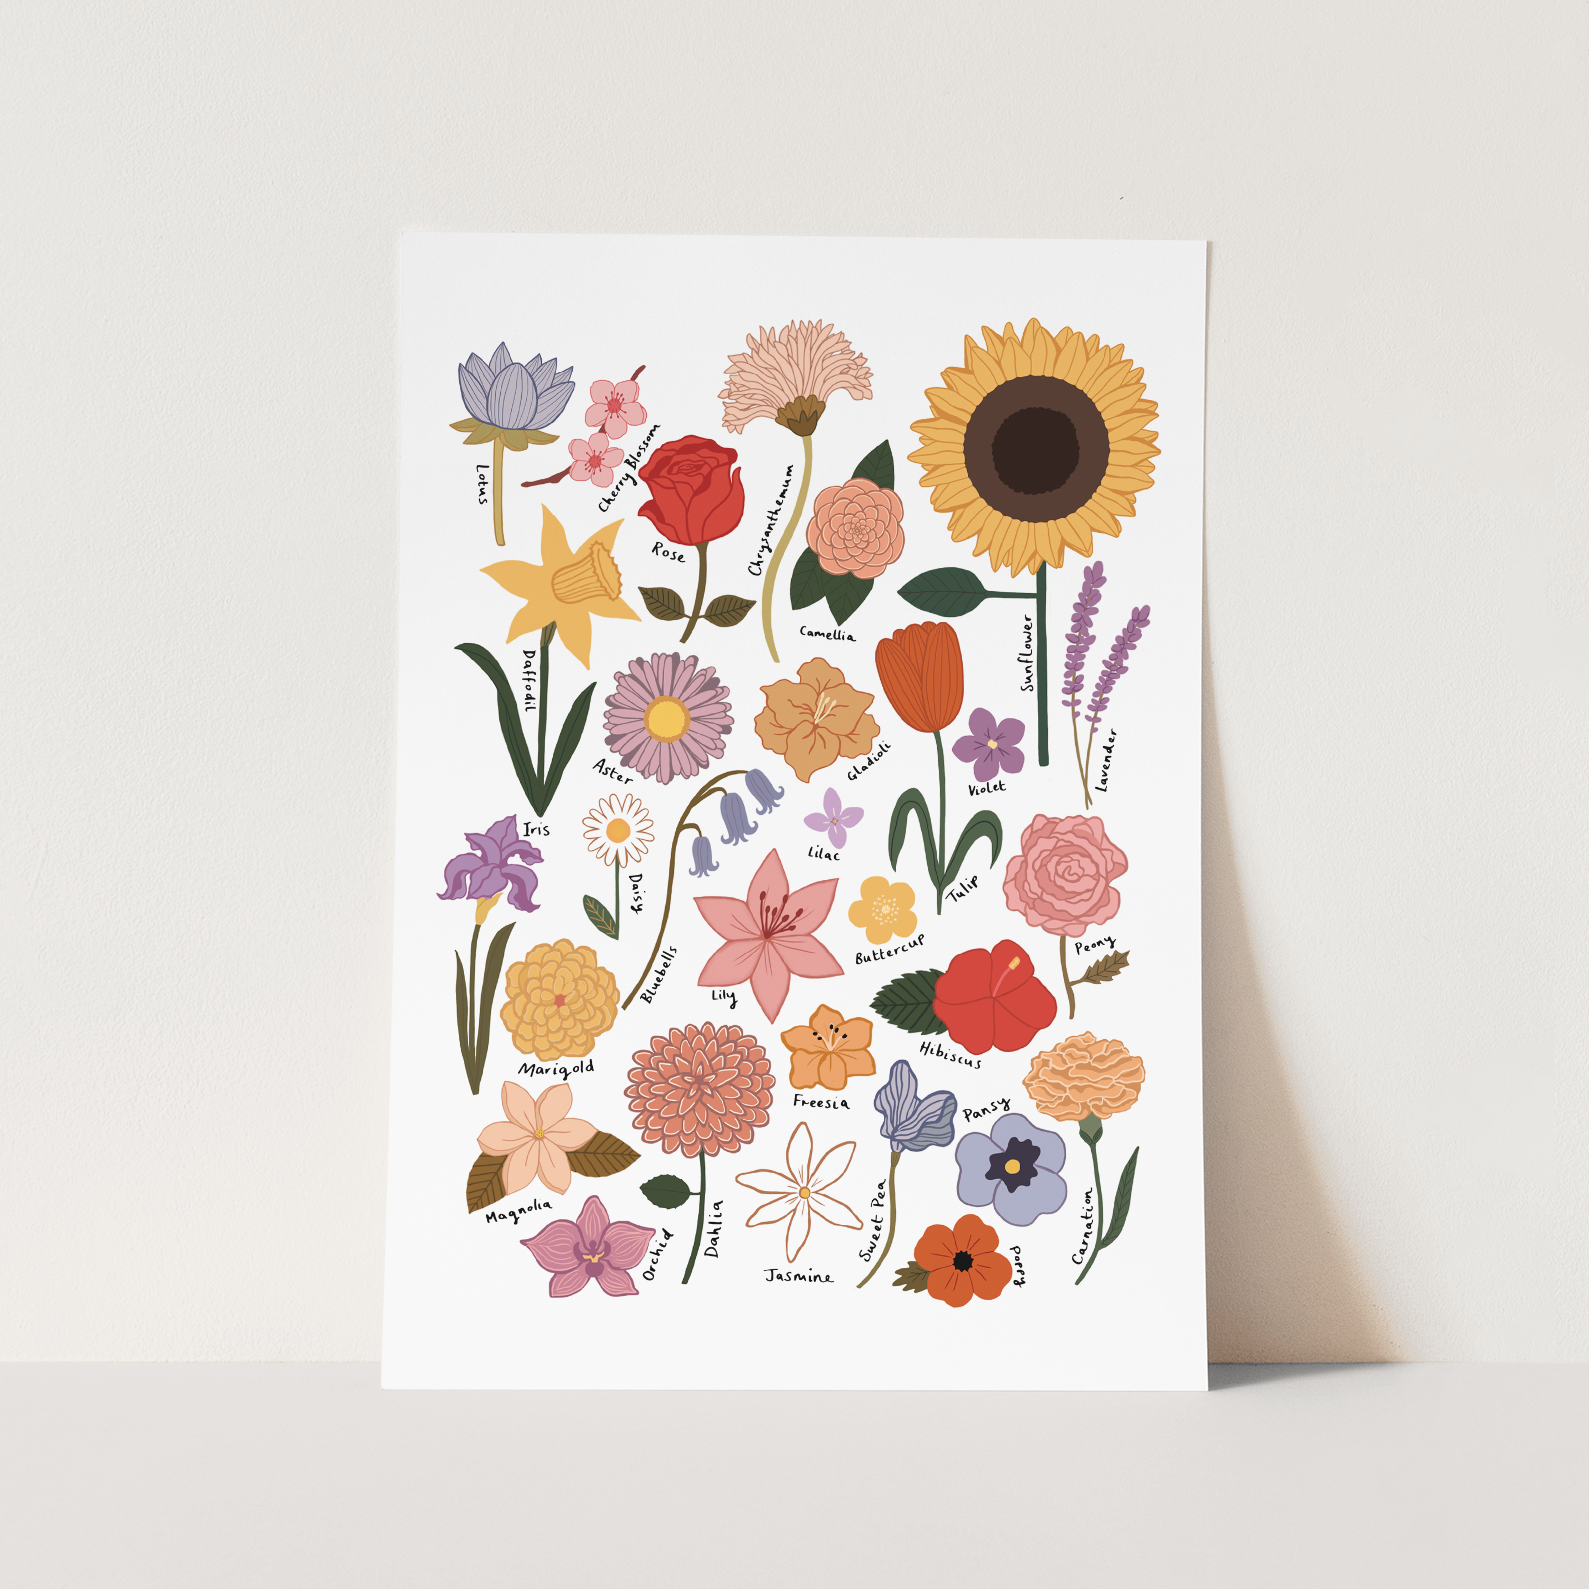 Flower Chart Art Print by Kid of the Village (6 Sizes Available)